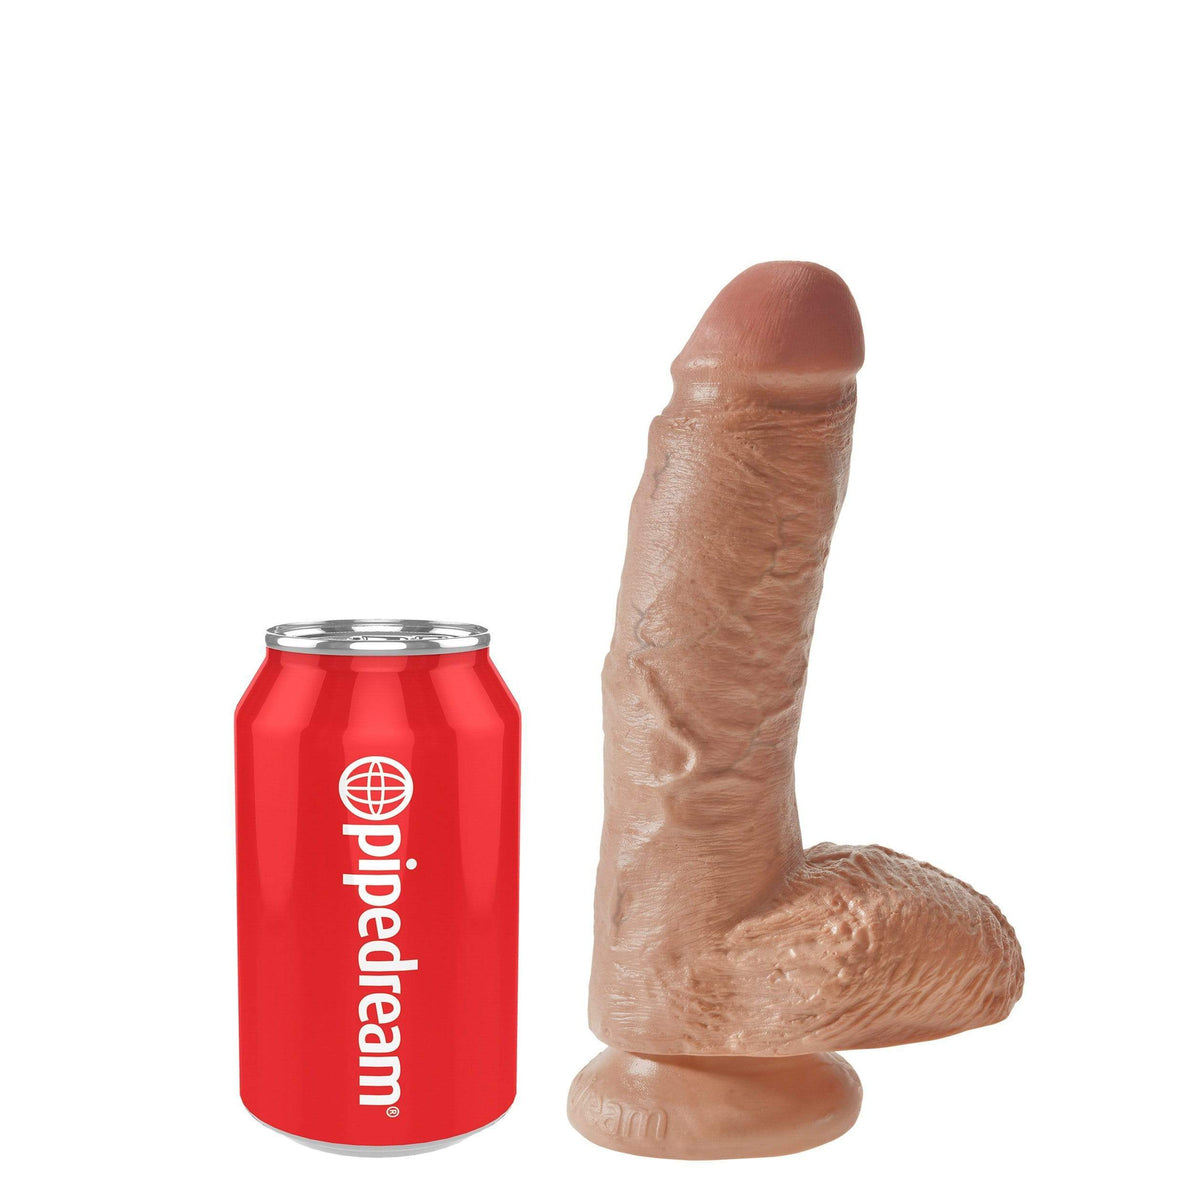 Pipedream - King Cock 8&quot; Cock with Balls (Brown)    Realistic Dildo with suction cup (Non Vibration)